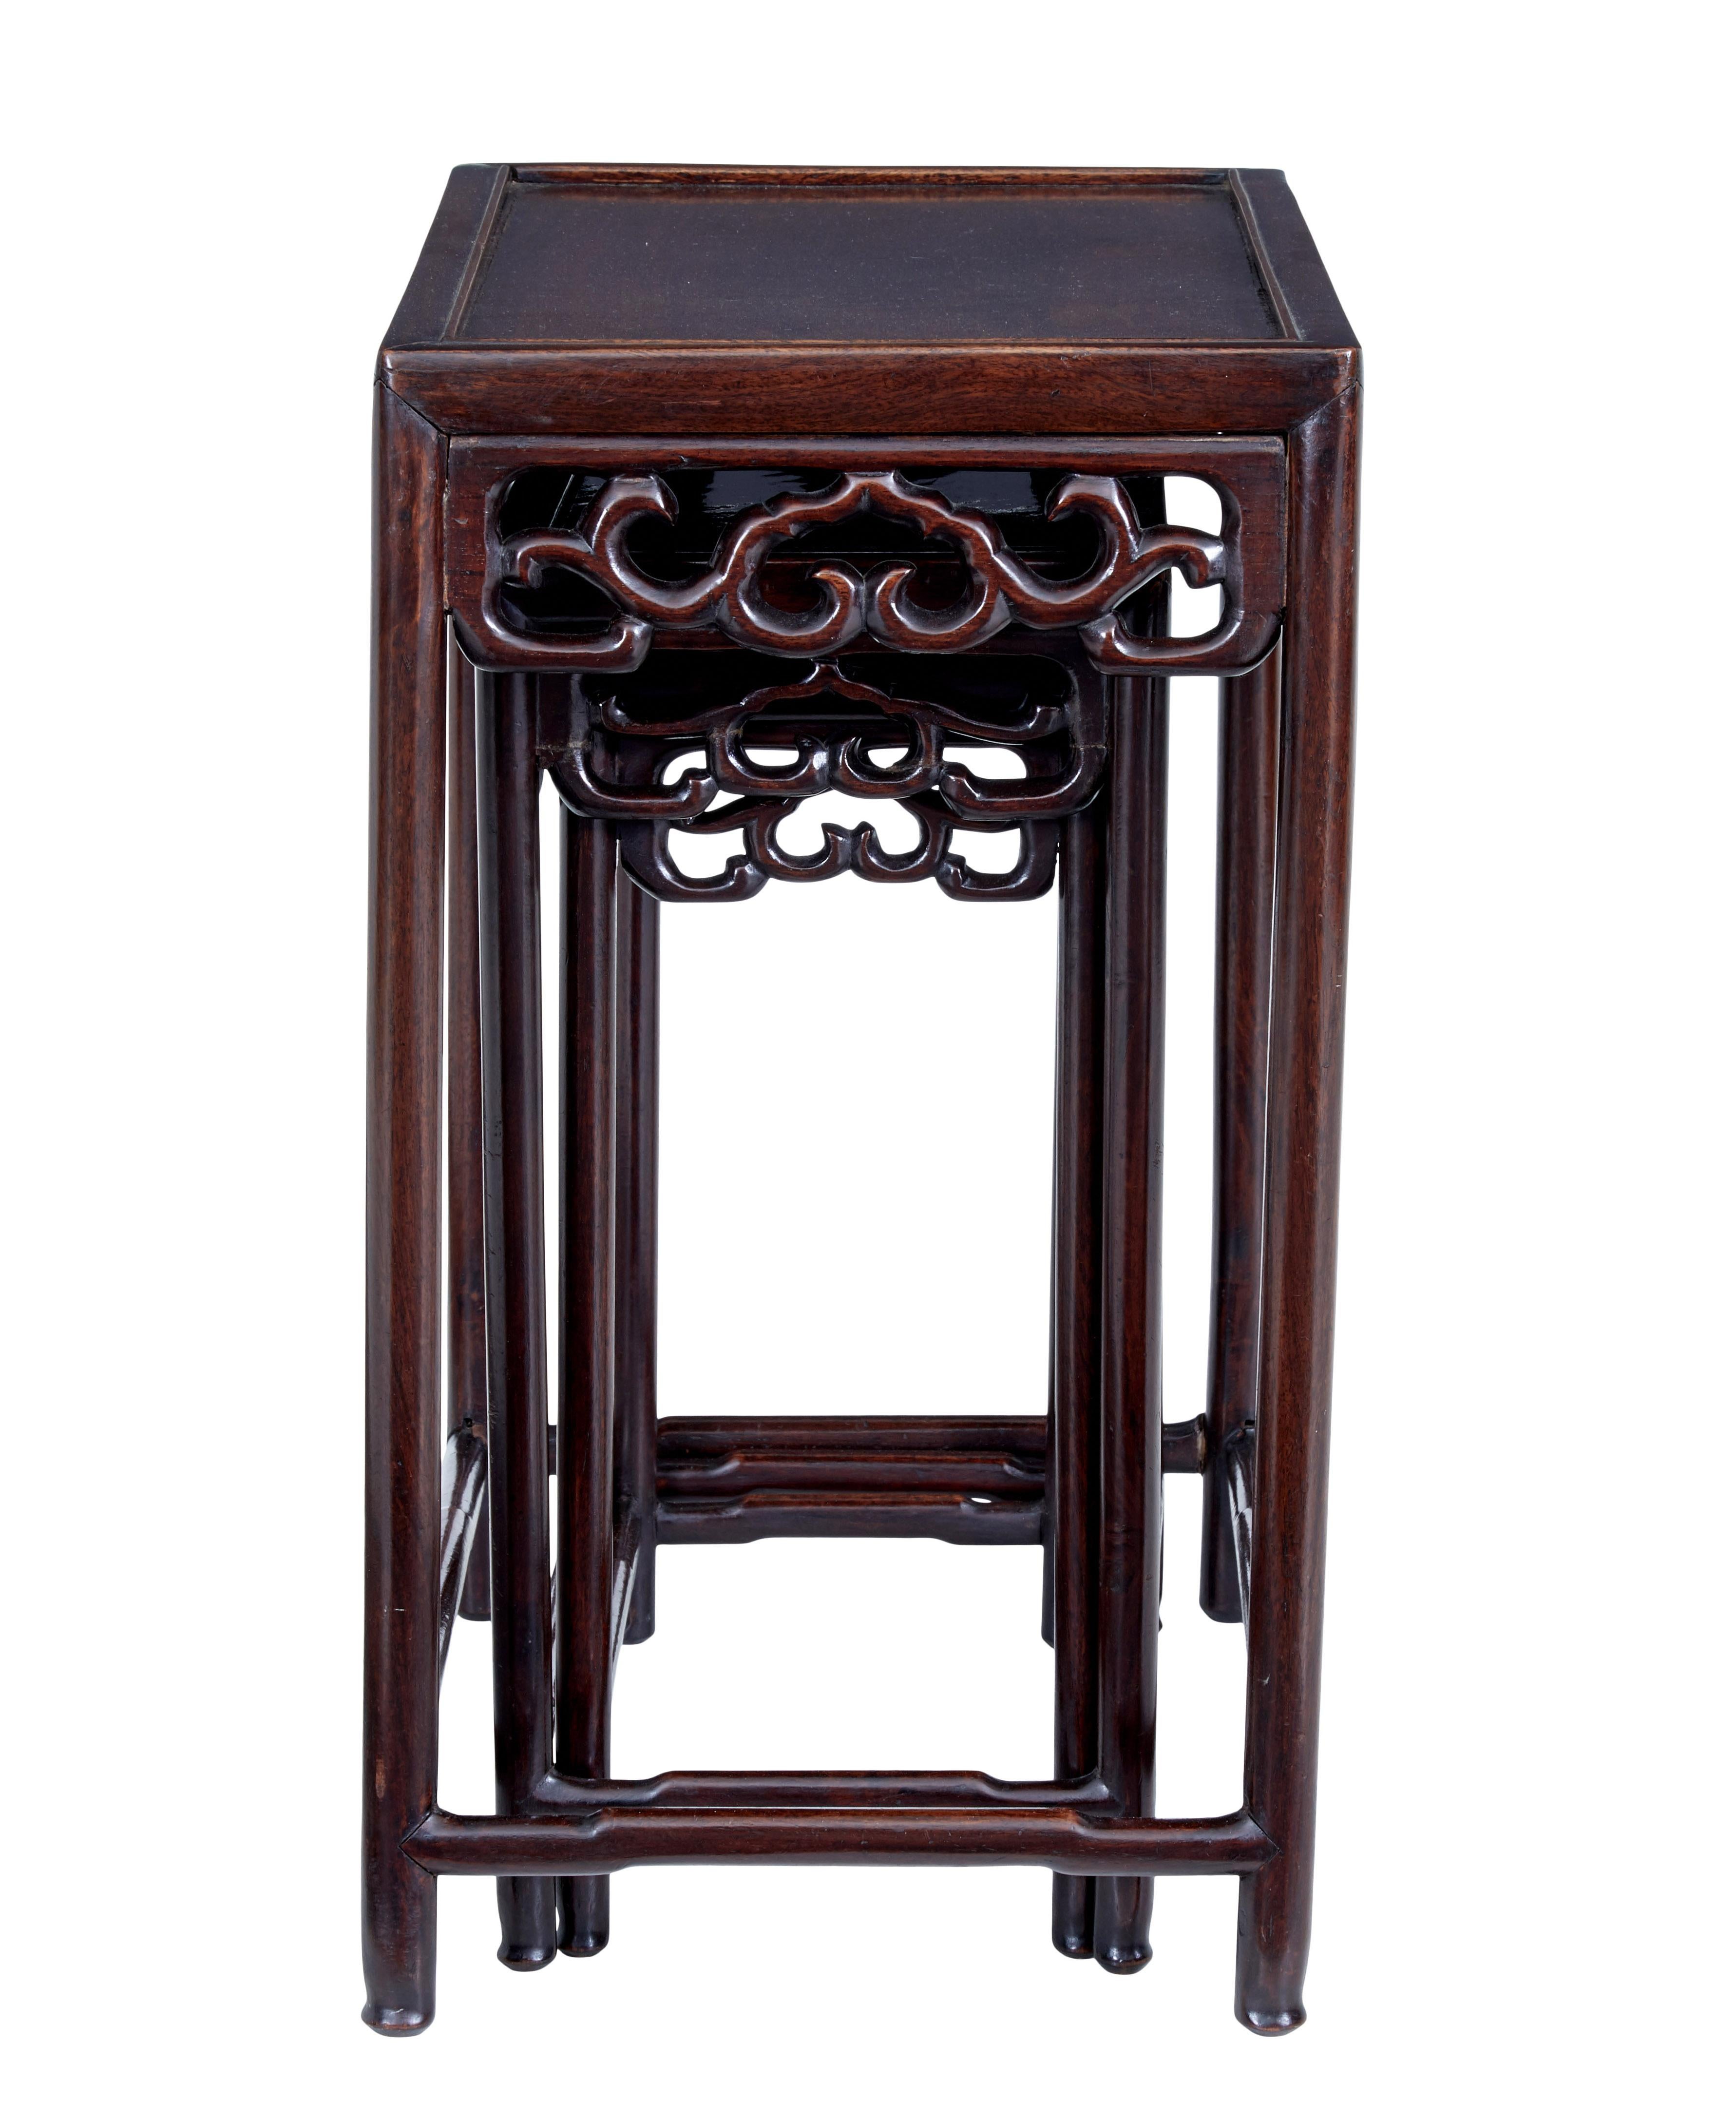 Late 19th century oriental nest of tables circa 1890.

Good quality set of 3 Chinese tables. Formerly a nest of 4. Good color and patina, similar to rosewood.

Nest forms by stacking as opposed to pulling out, ideal for making a set of